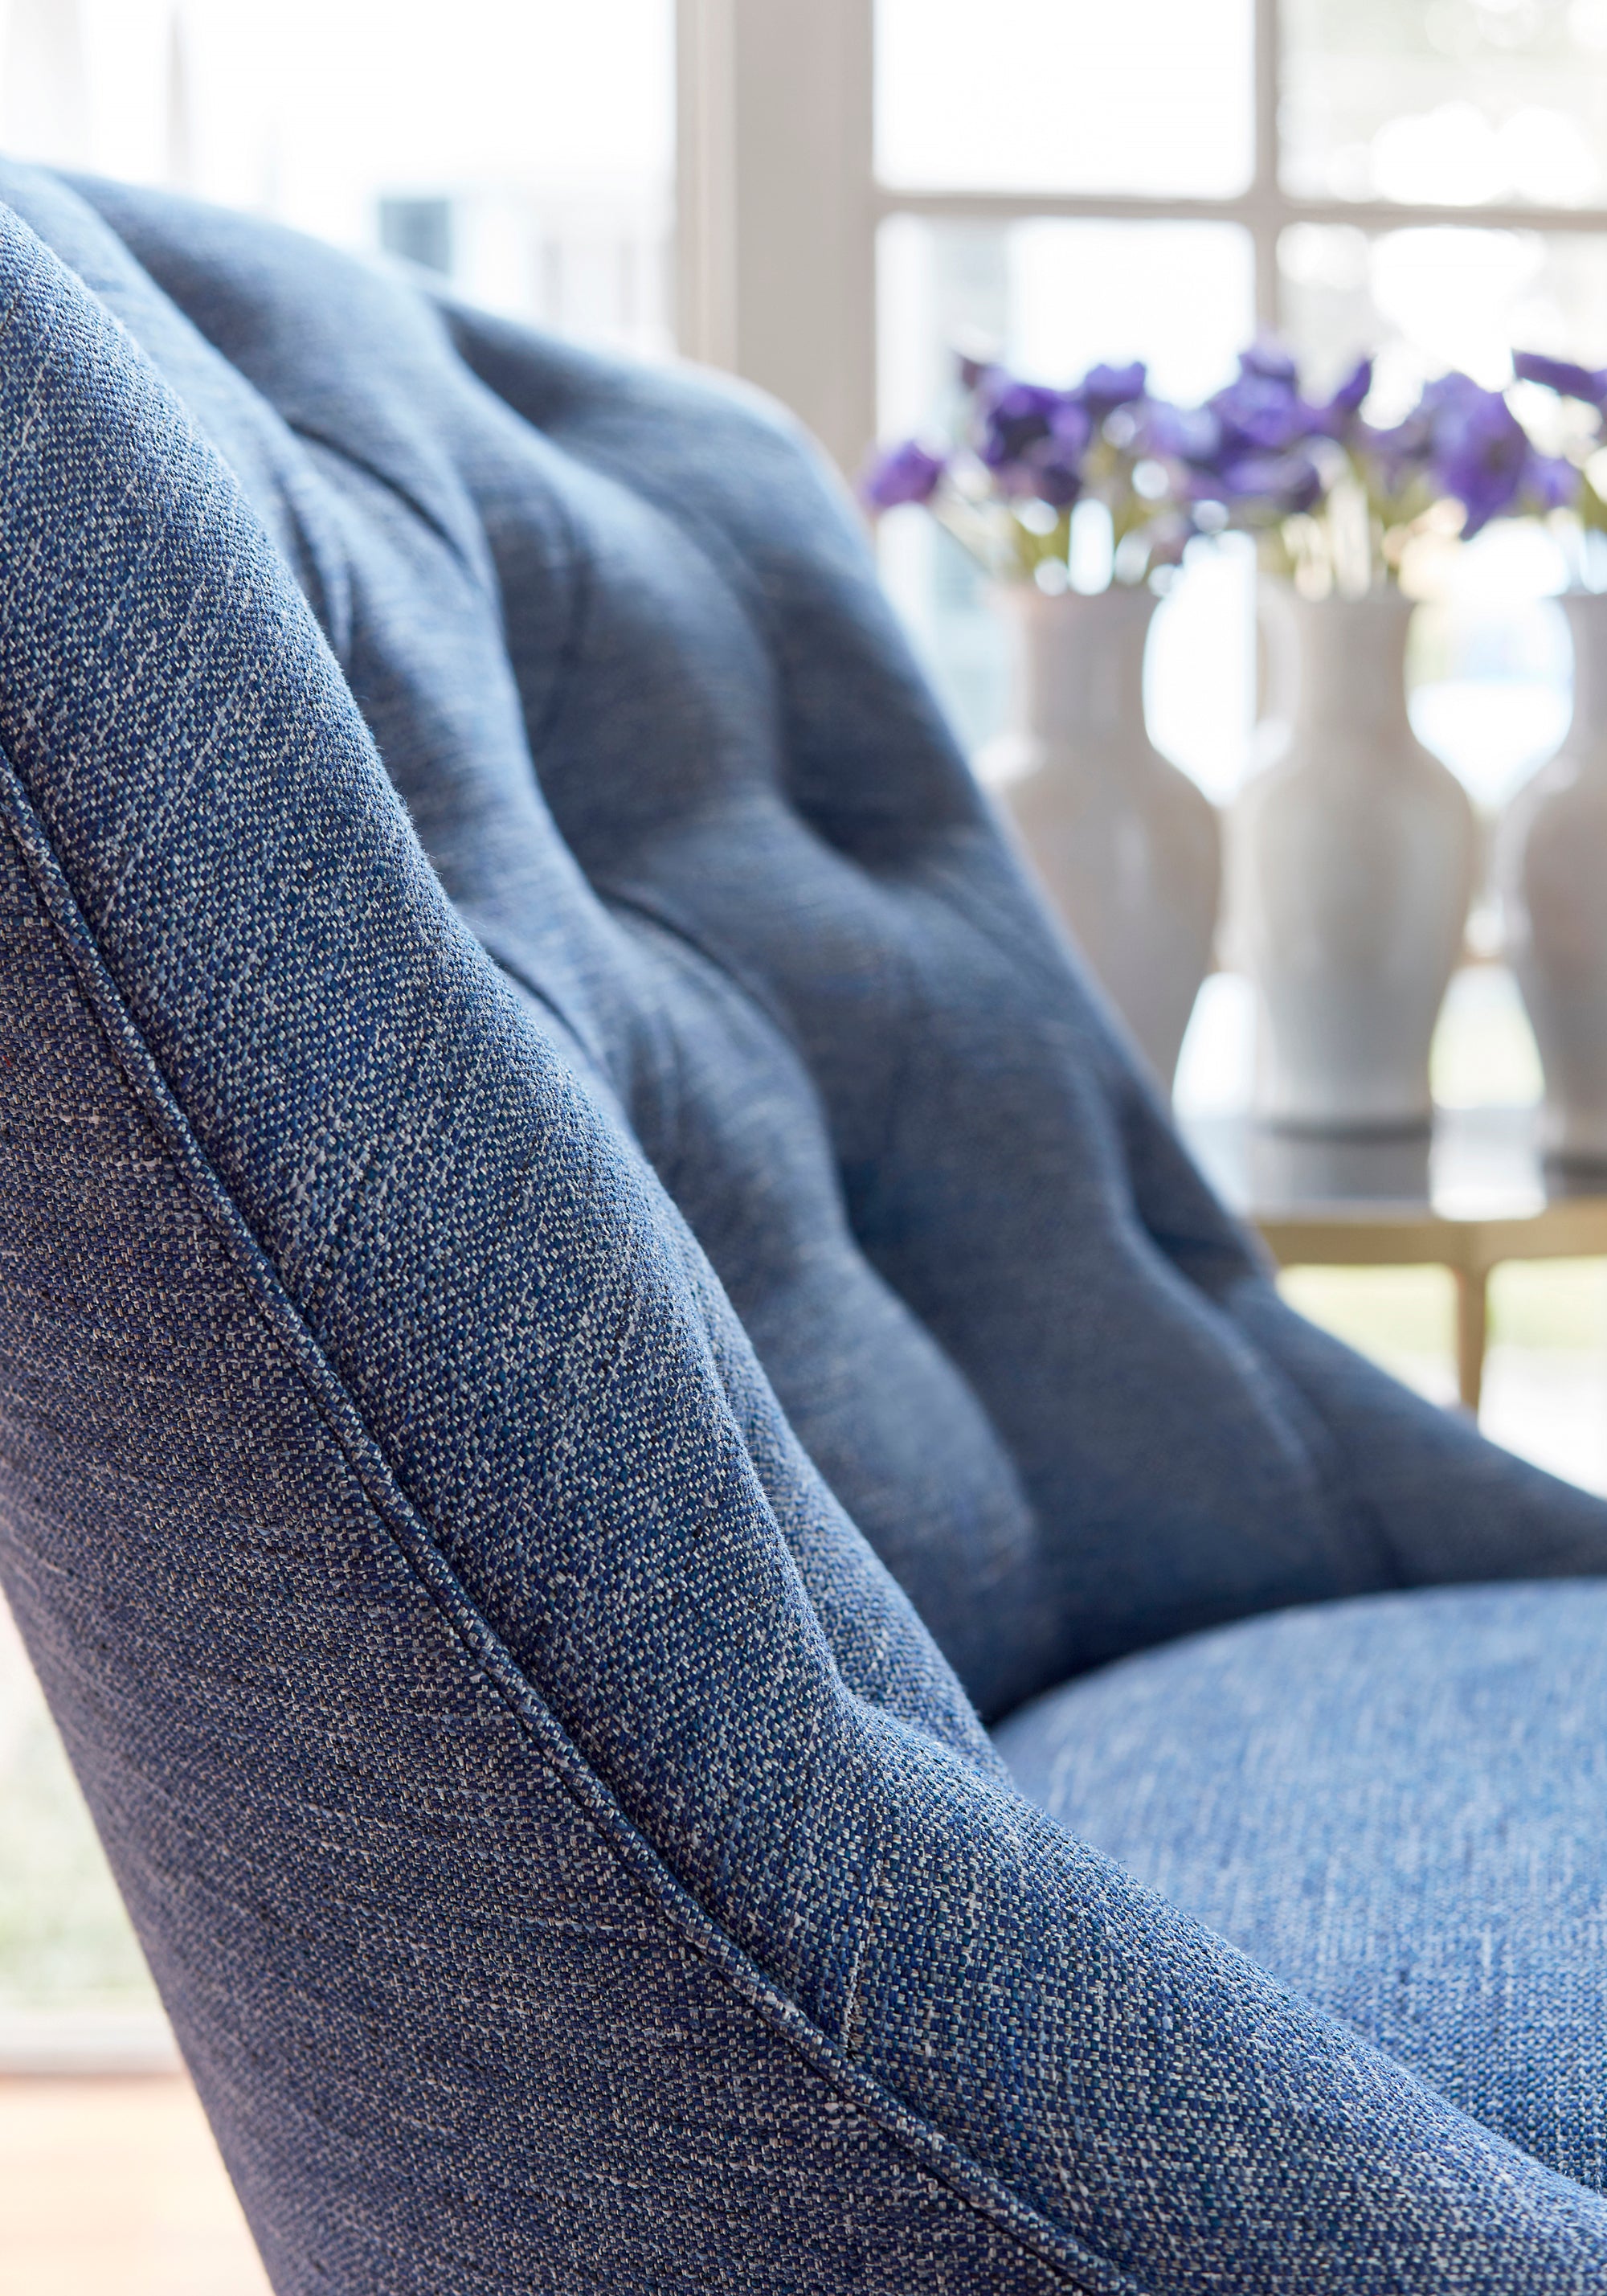 Detailed view of Belaire Chair in Dante woven fabric in navy color - pattern number W80700 by Thibaut in the Woven Resource Vol 11 Rialto collection